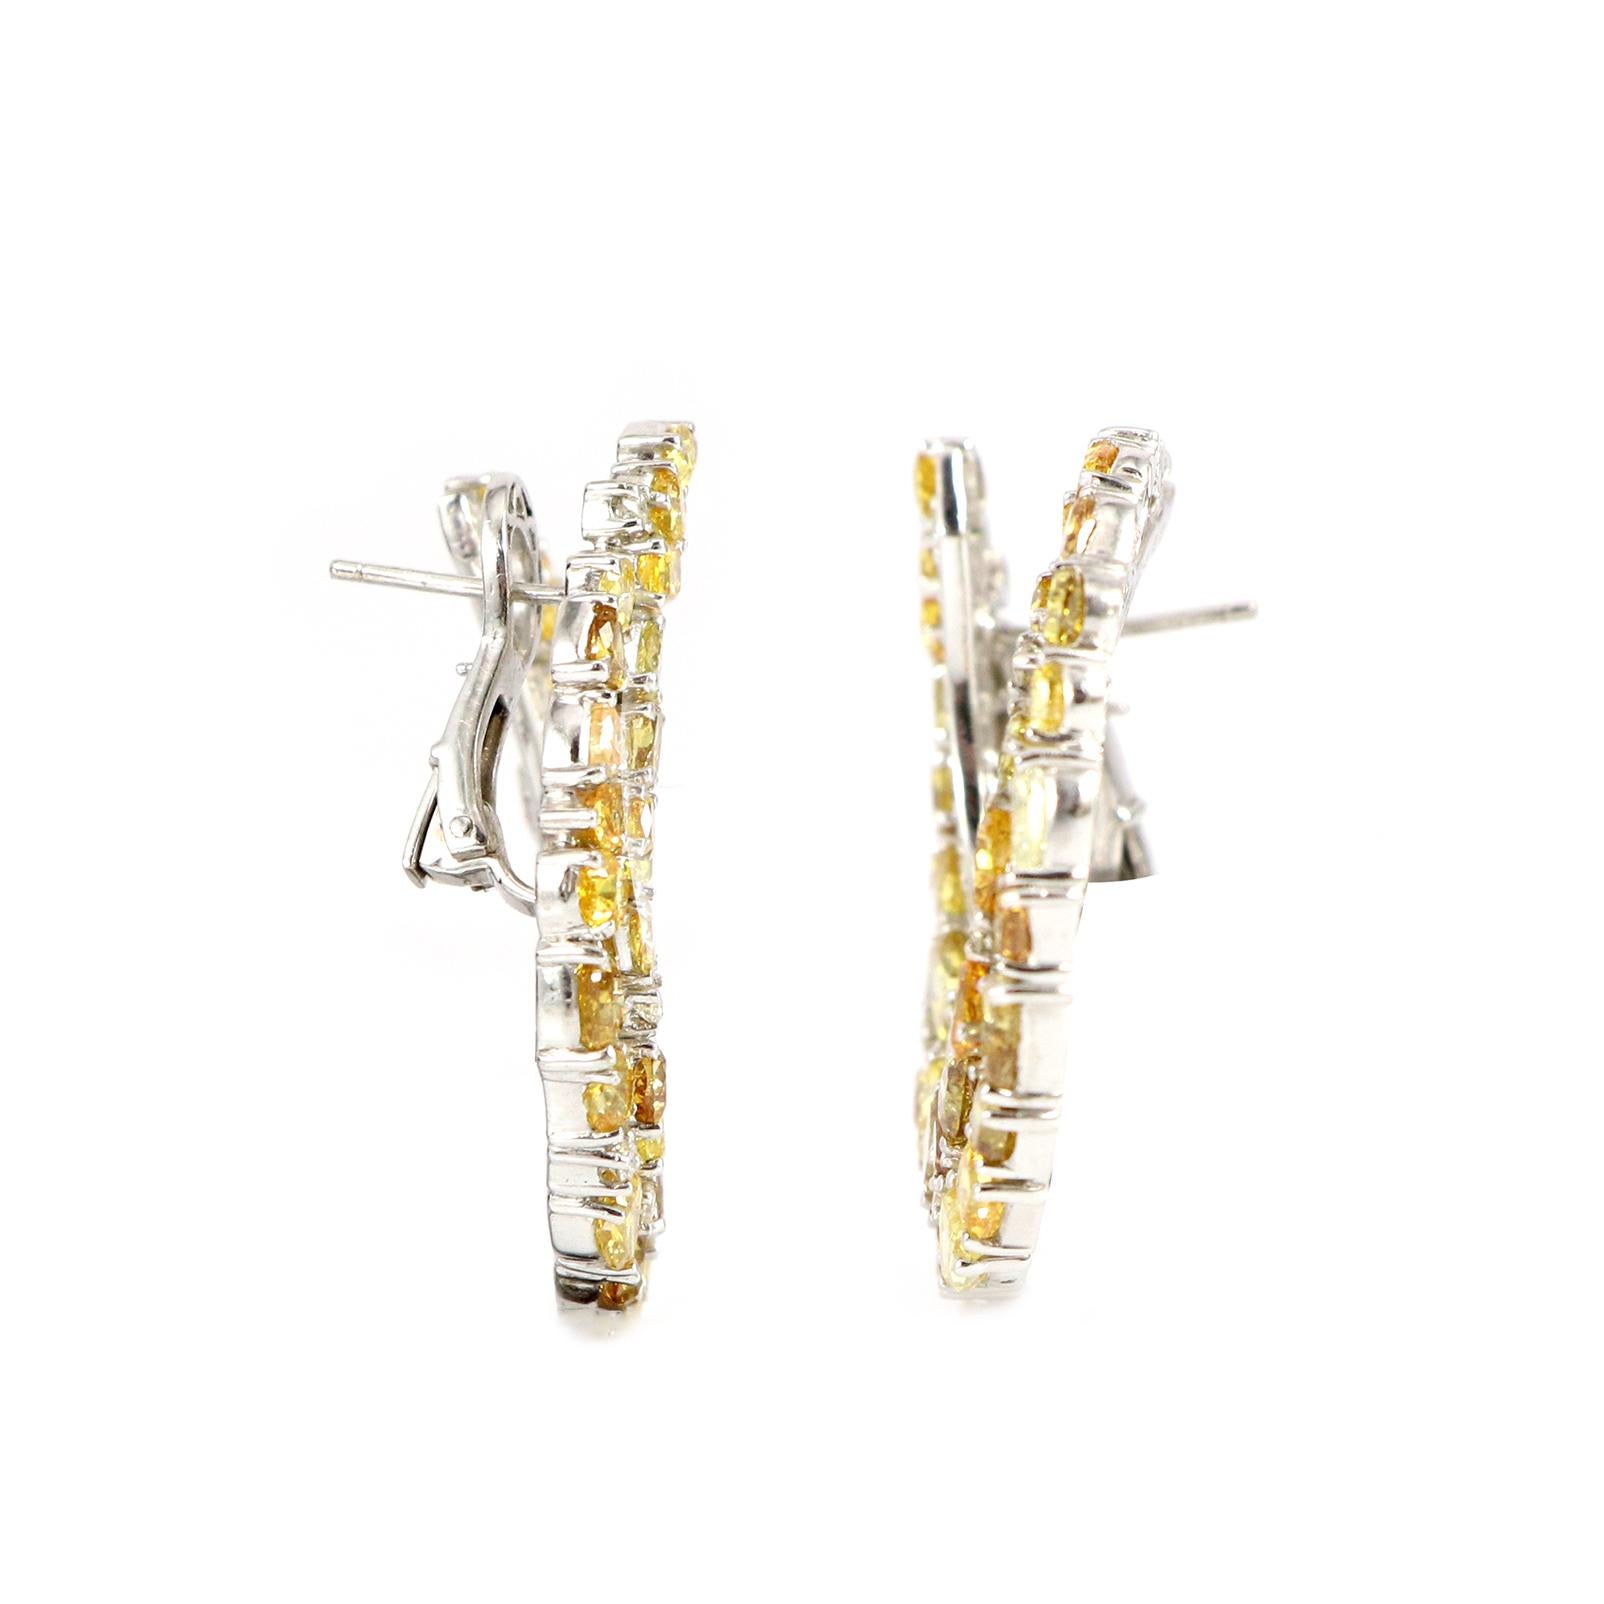 Introducing our stunning earrings designed to infuse elegance and radiance into your style. Whether you adore the warm glow, the vibrant sparkle, or the delicate charm of yellow diamonds, we offer the ideal pair to enhance any ensemble. Each Diamond